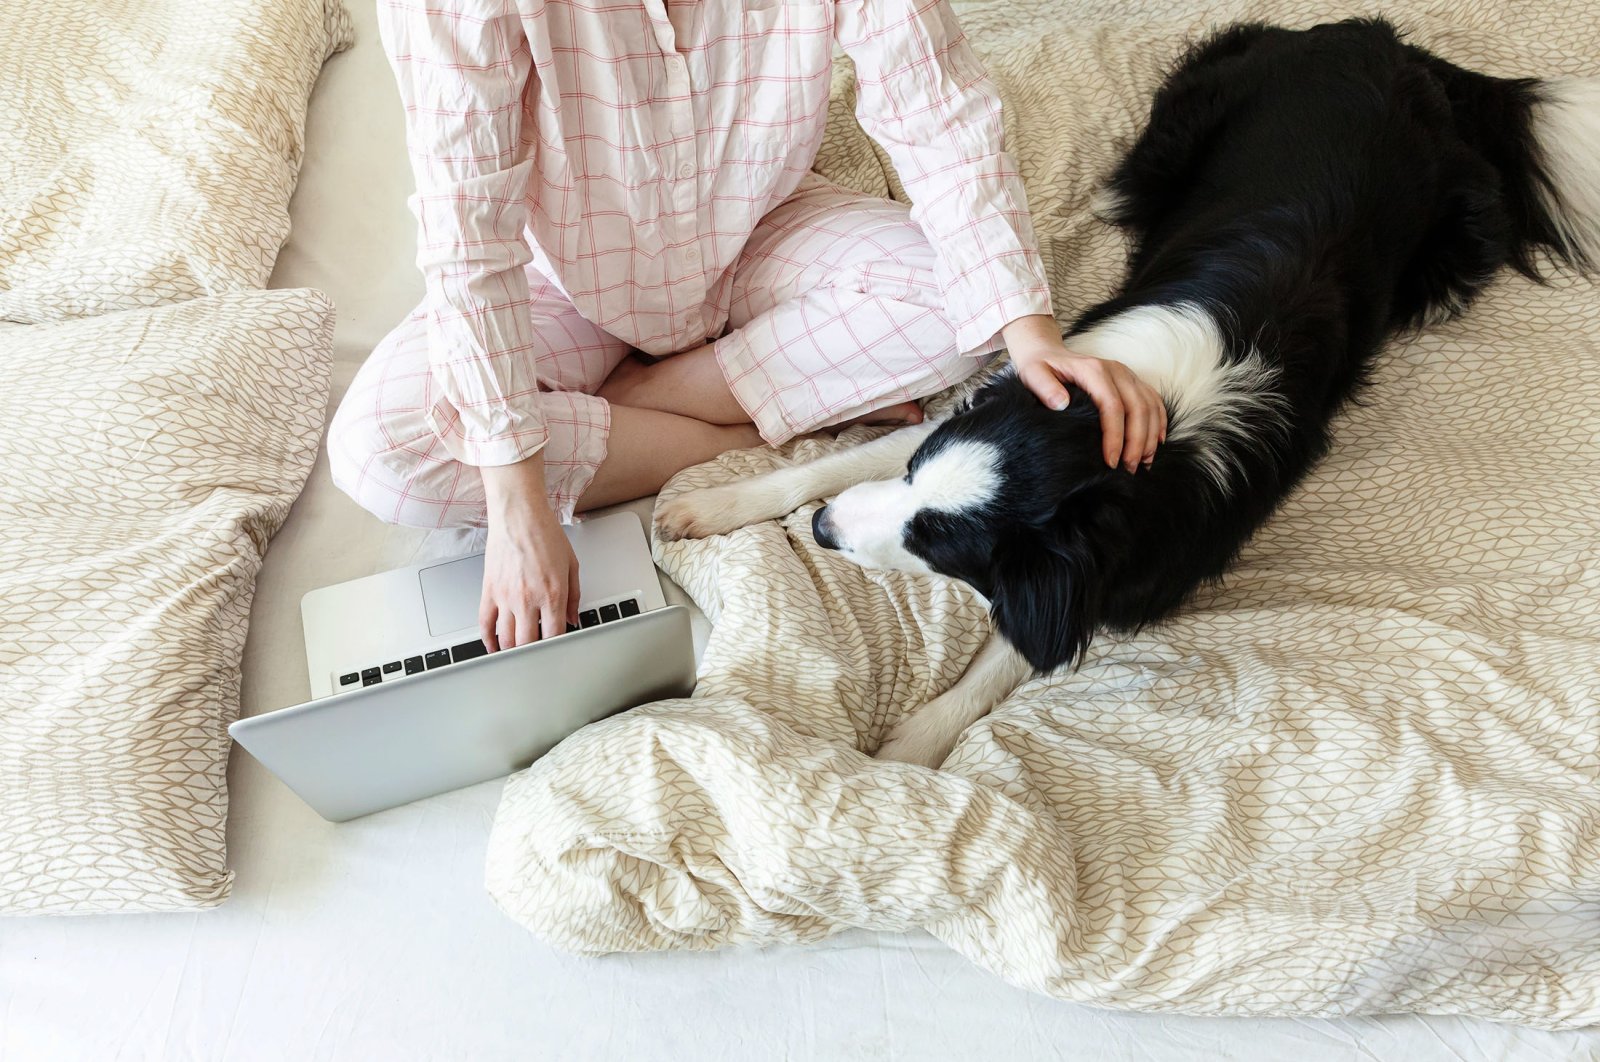 Not everyone can feel productive or professional when working in pajamas. (Shutterstock Photo)